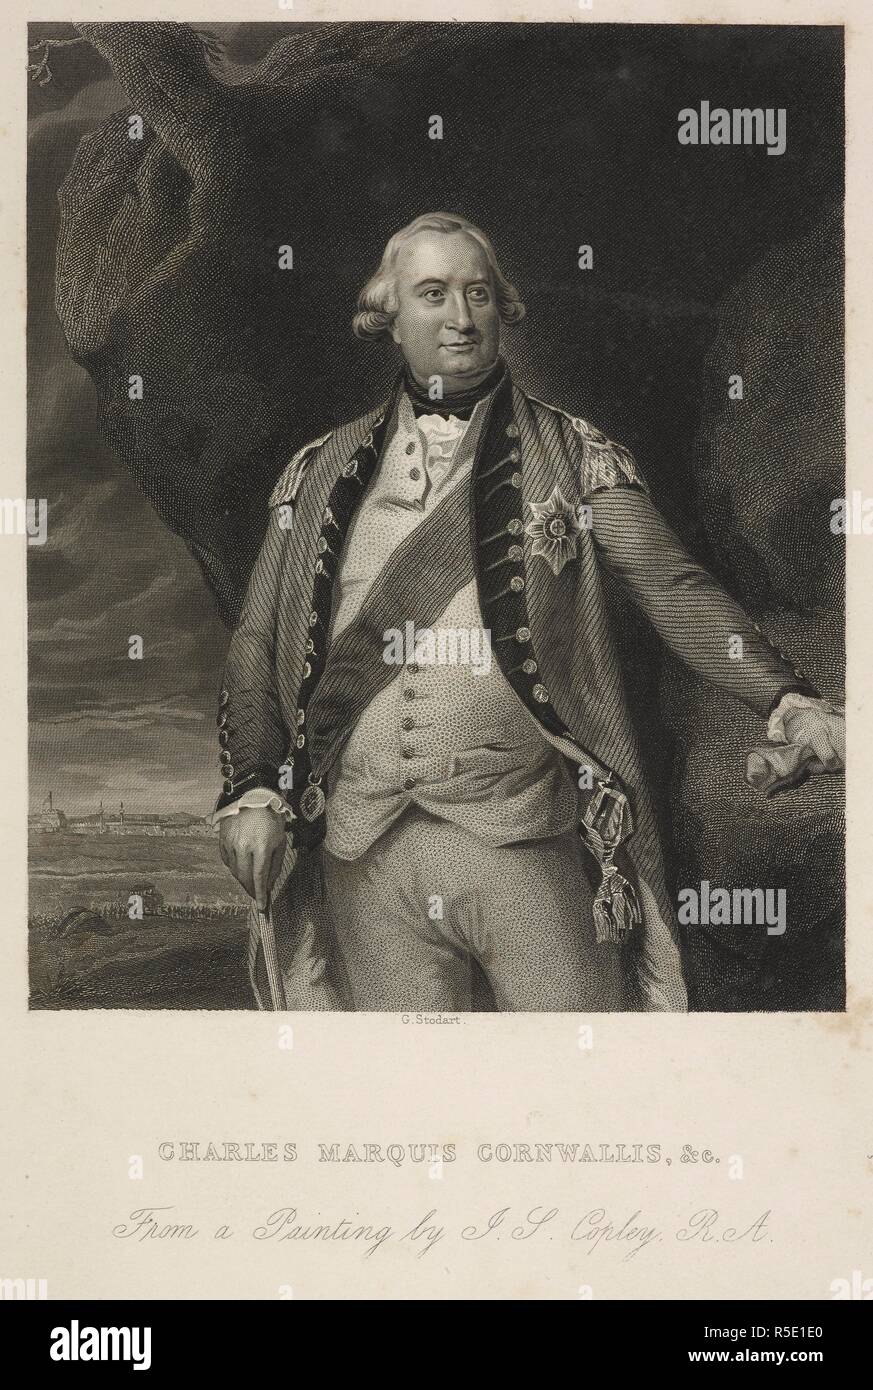 Engraving of Charles Marquis Cornwallis, 18th century general in the Army in the American Revolutionary War, and later Governor General of India. From a painting by J.S. Copley R.A. Charles Marquis Cornwallis. (1738-1803). Artist: Stodart, George J. (d.1884). Source: P3177. Stock Photo